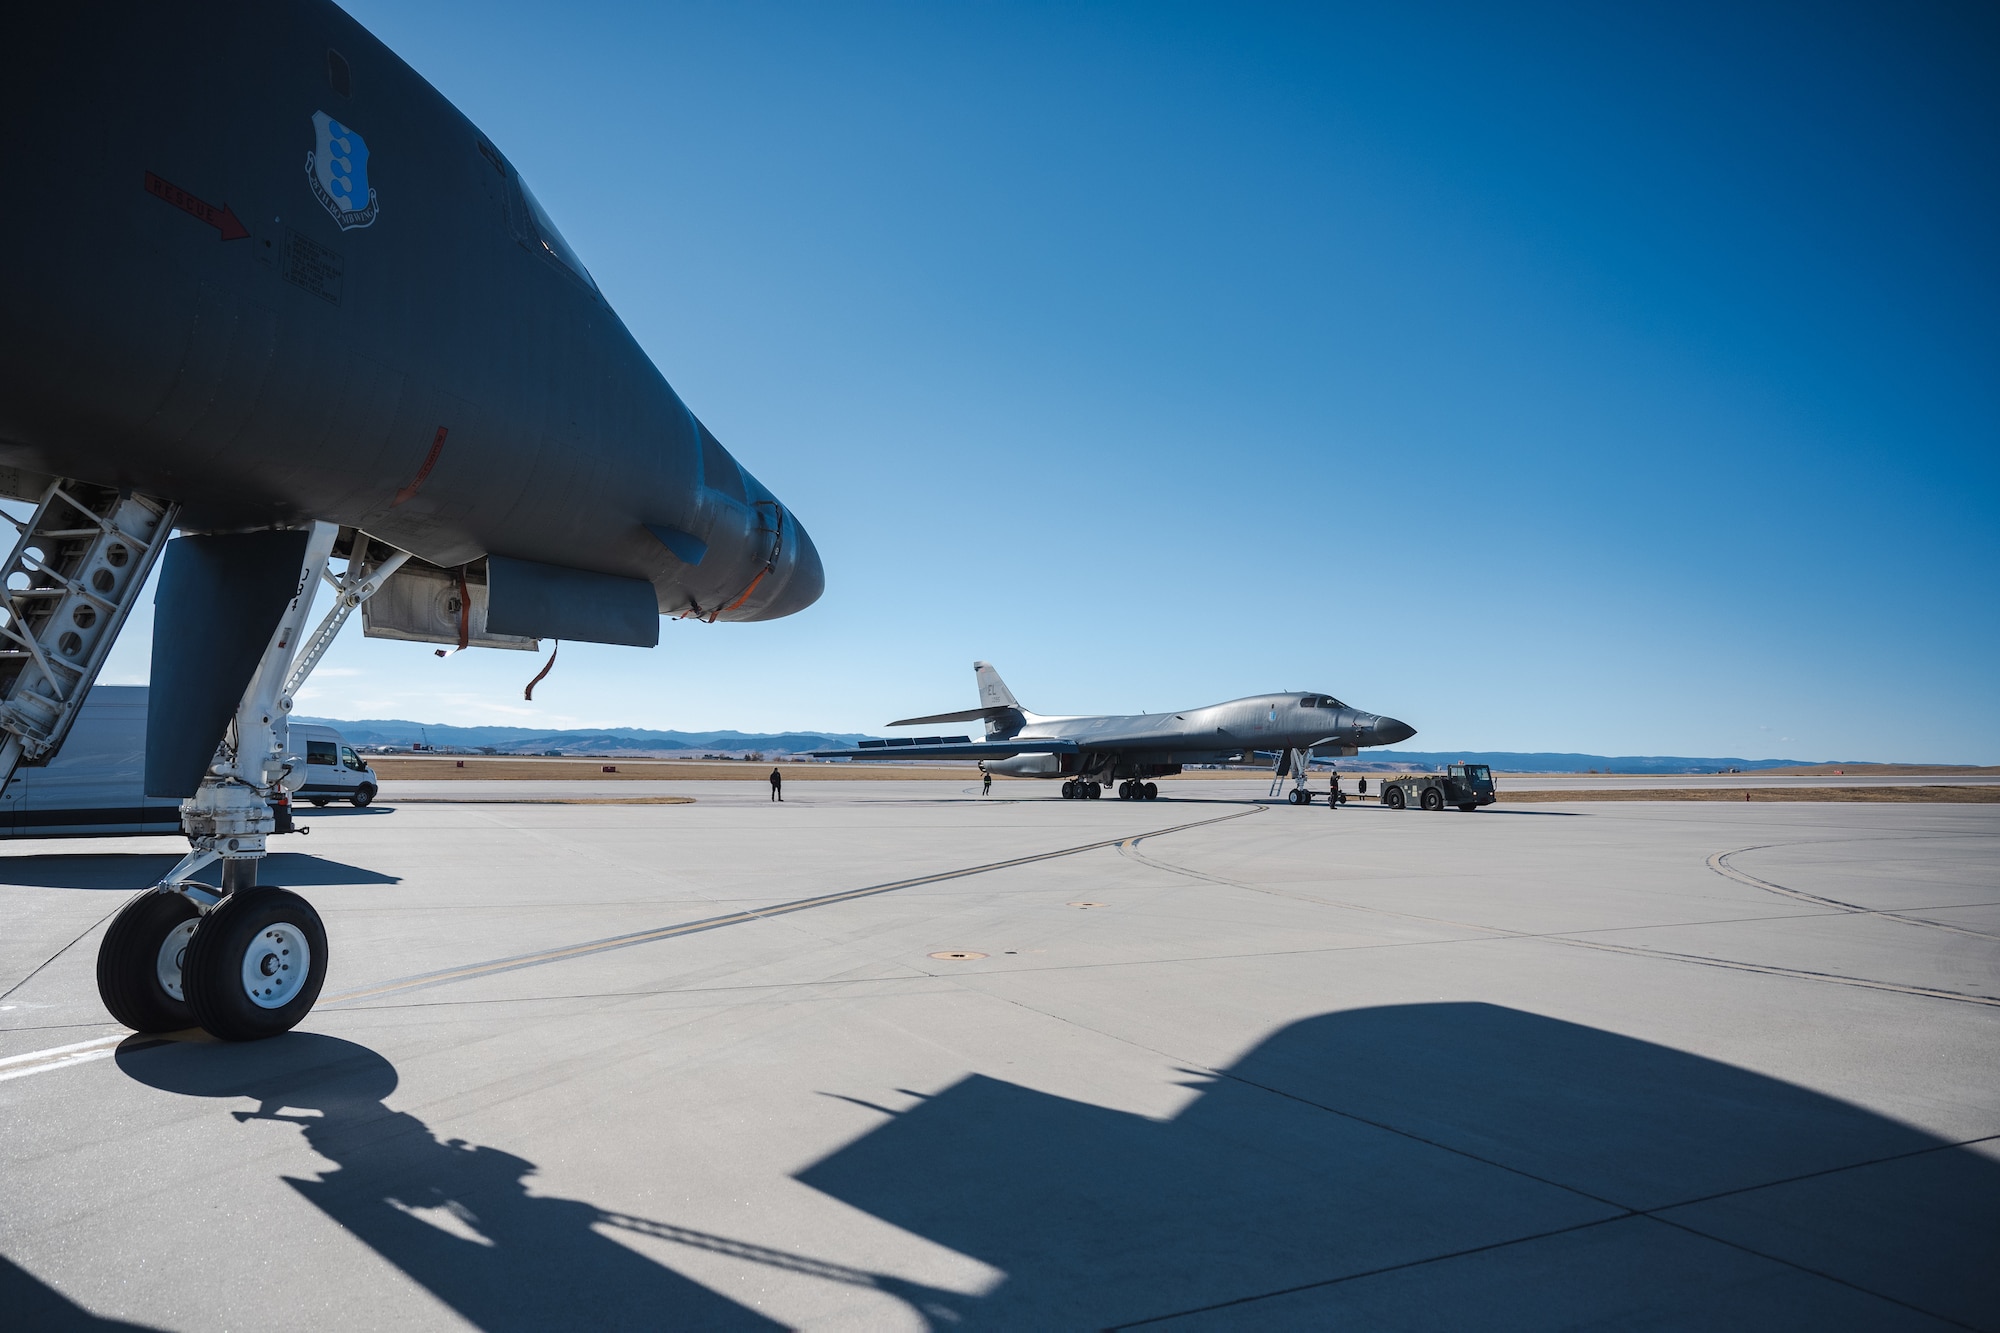 Airmen from the 28th Aircraft Maintenance Squadron, tow a B-1B Lancer to a weapons loading pad in preparation for a Weapon System Evaluation program, at Ellsworth Air Force Base, S.D., Nov. 7, 2022.